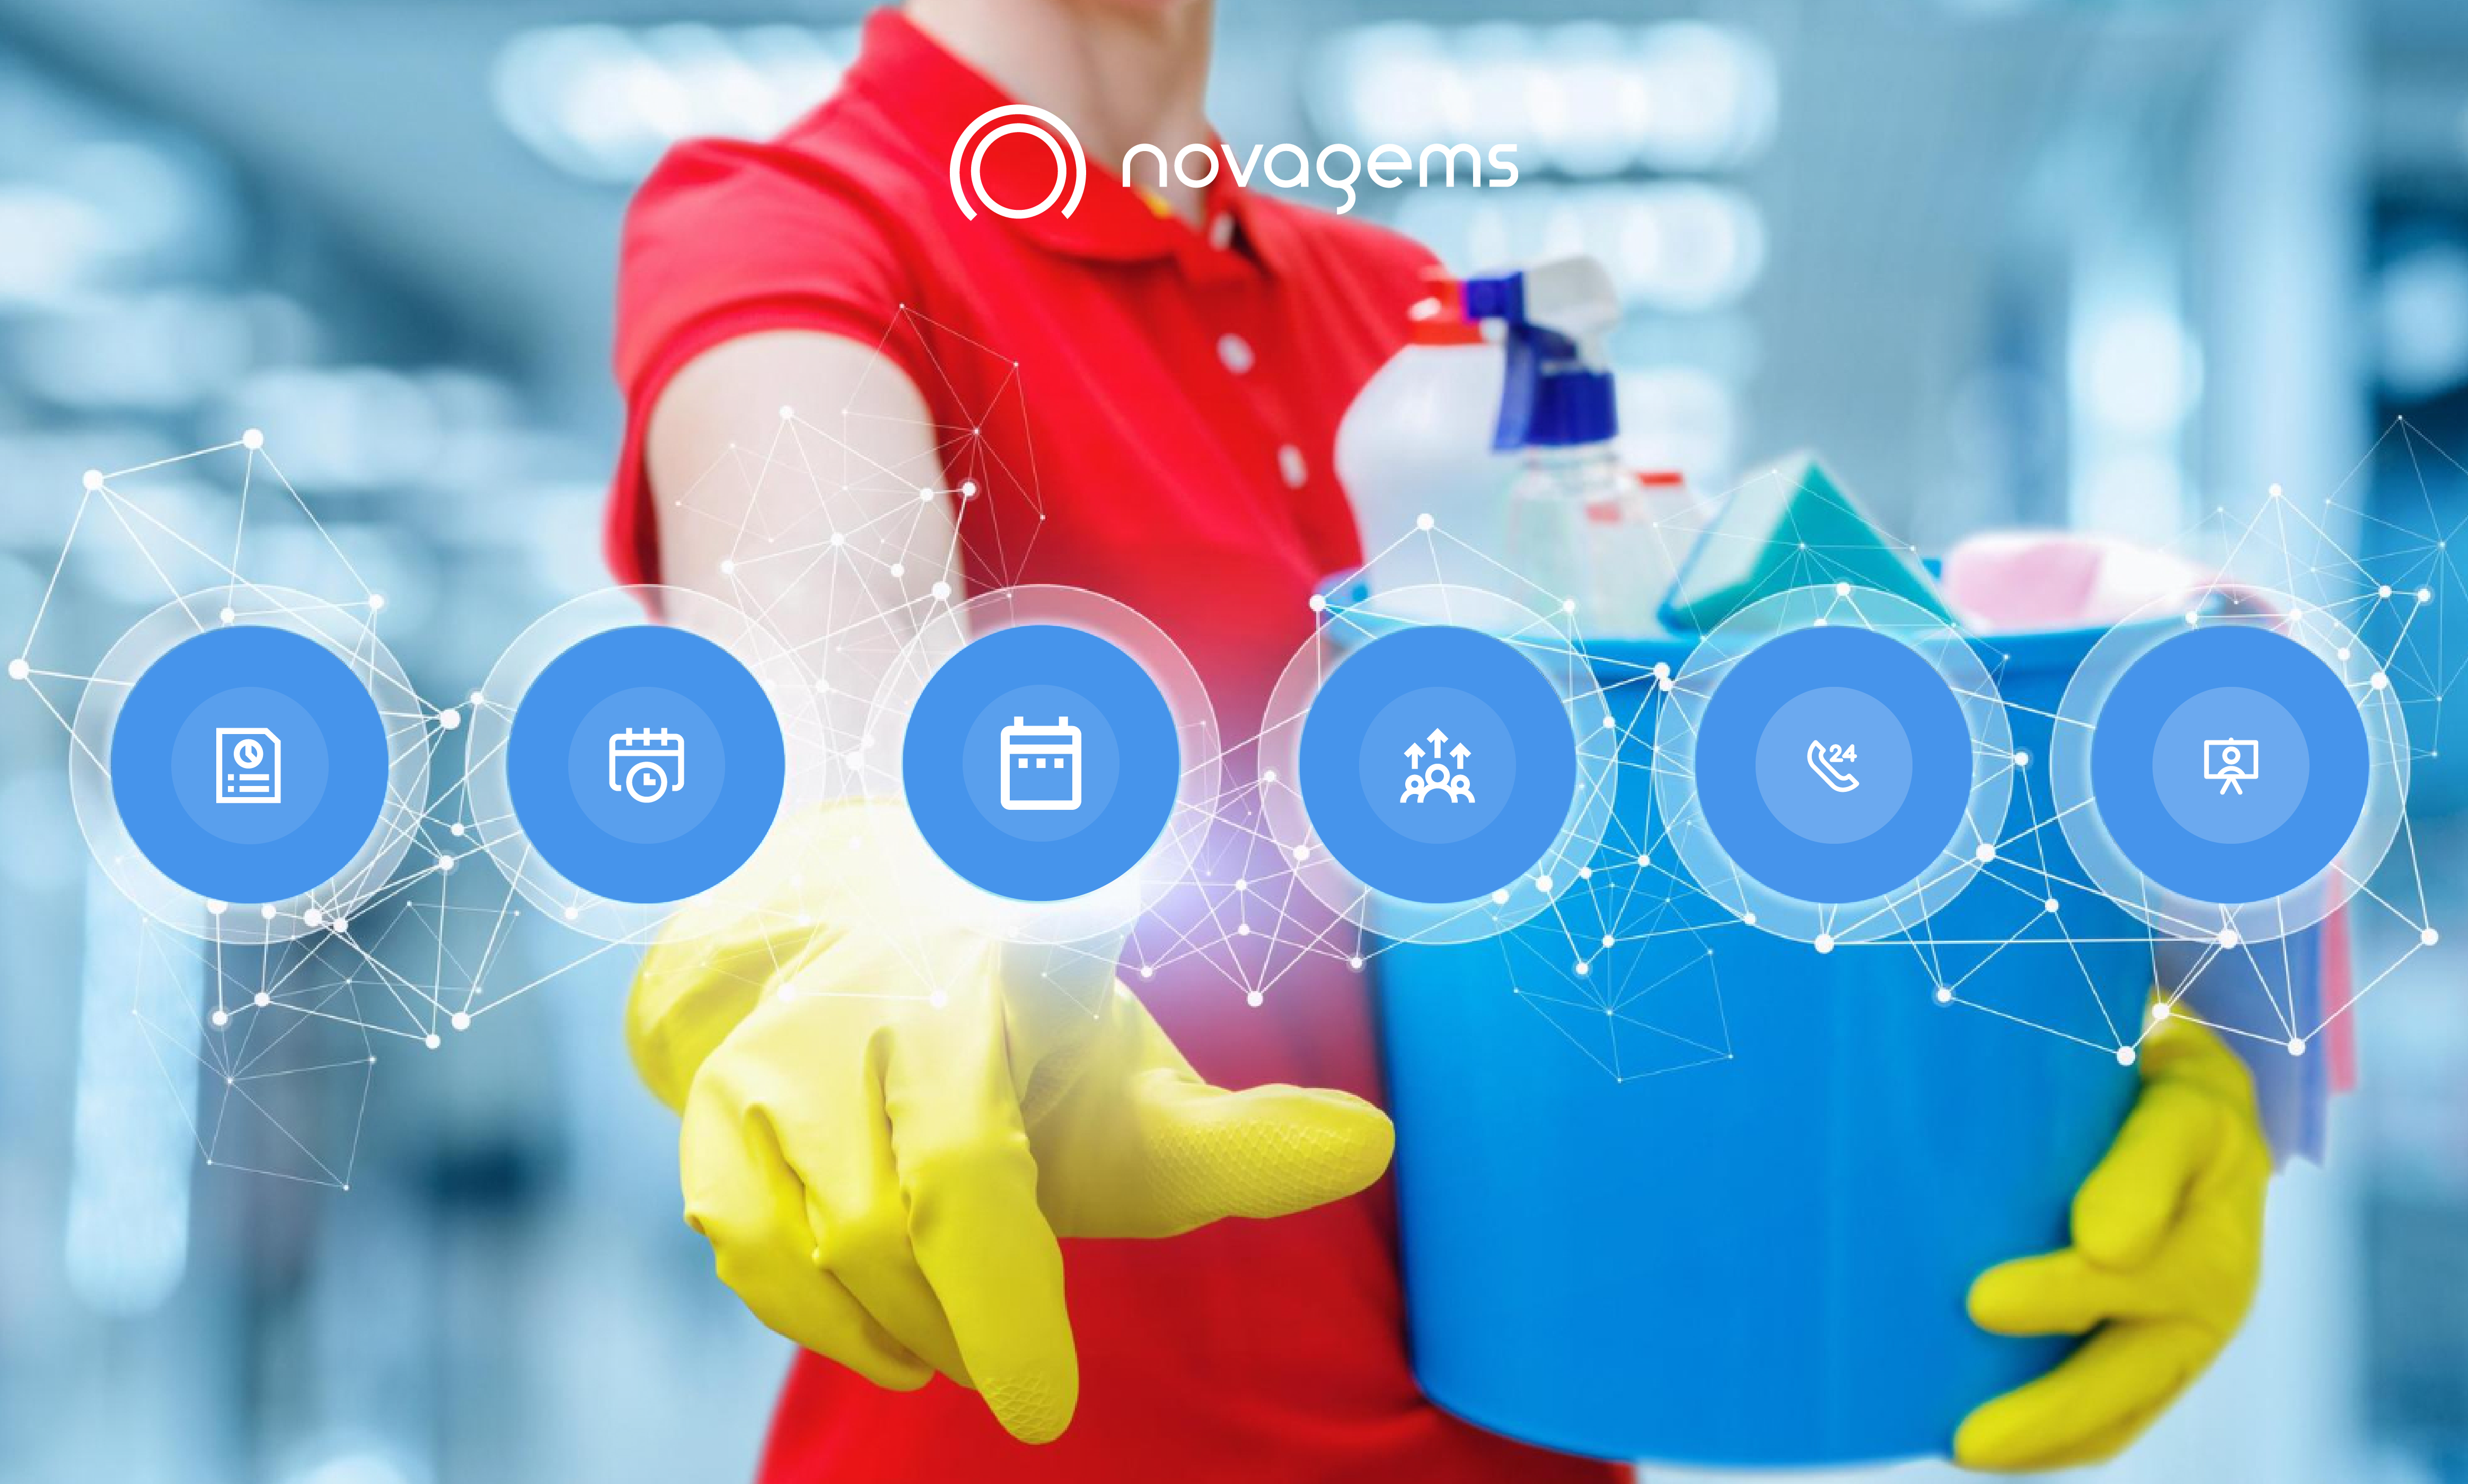 How Cleaning Companies Are Using Technology To Upscale Their Business